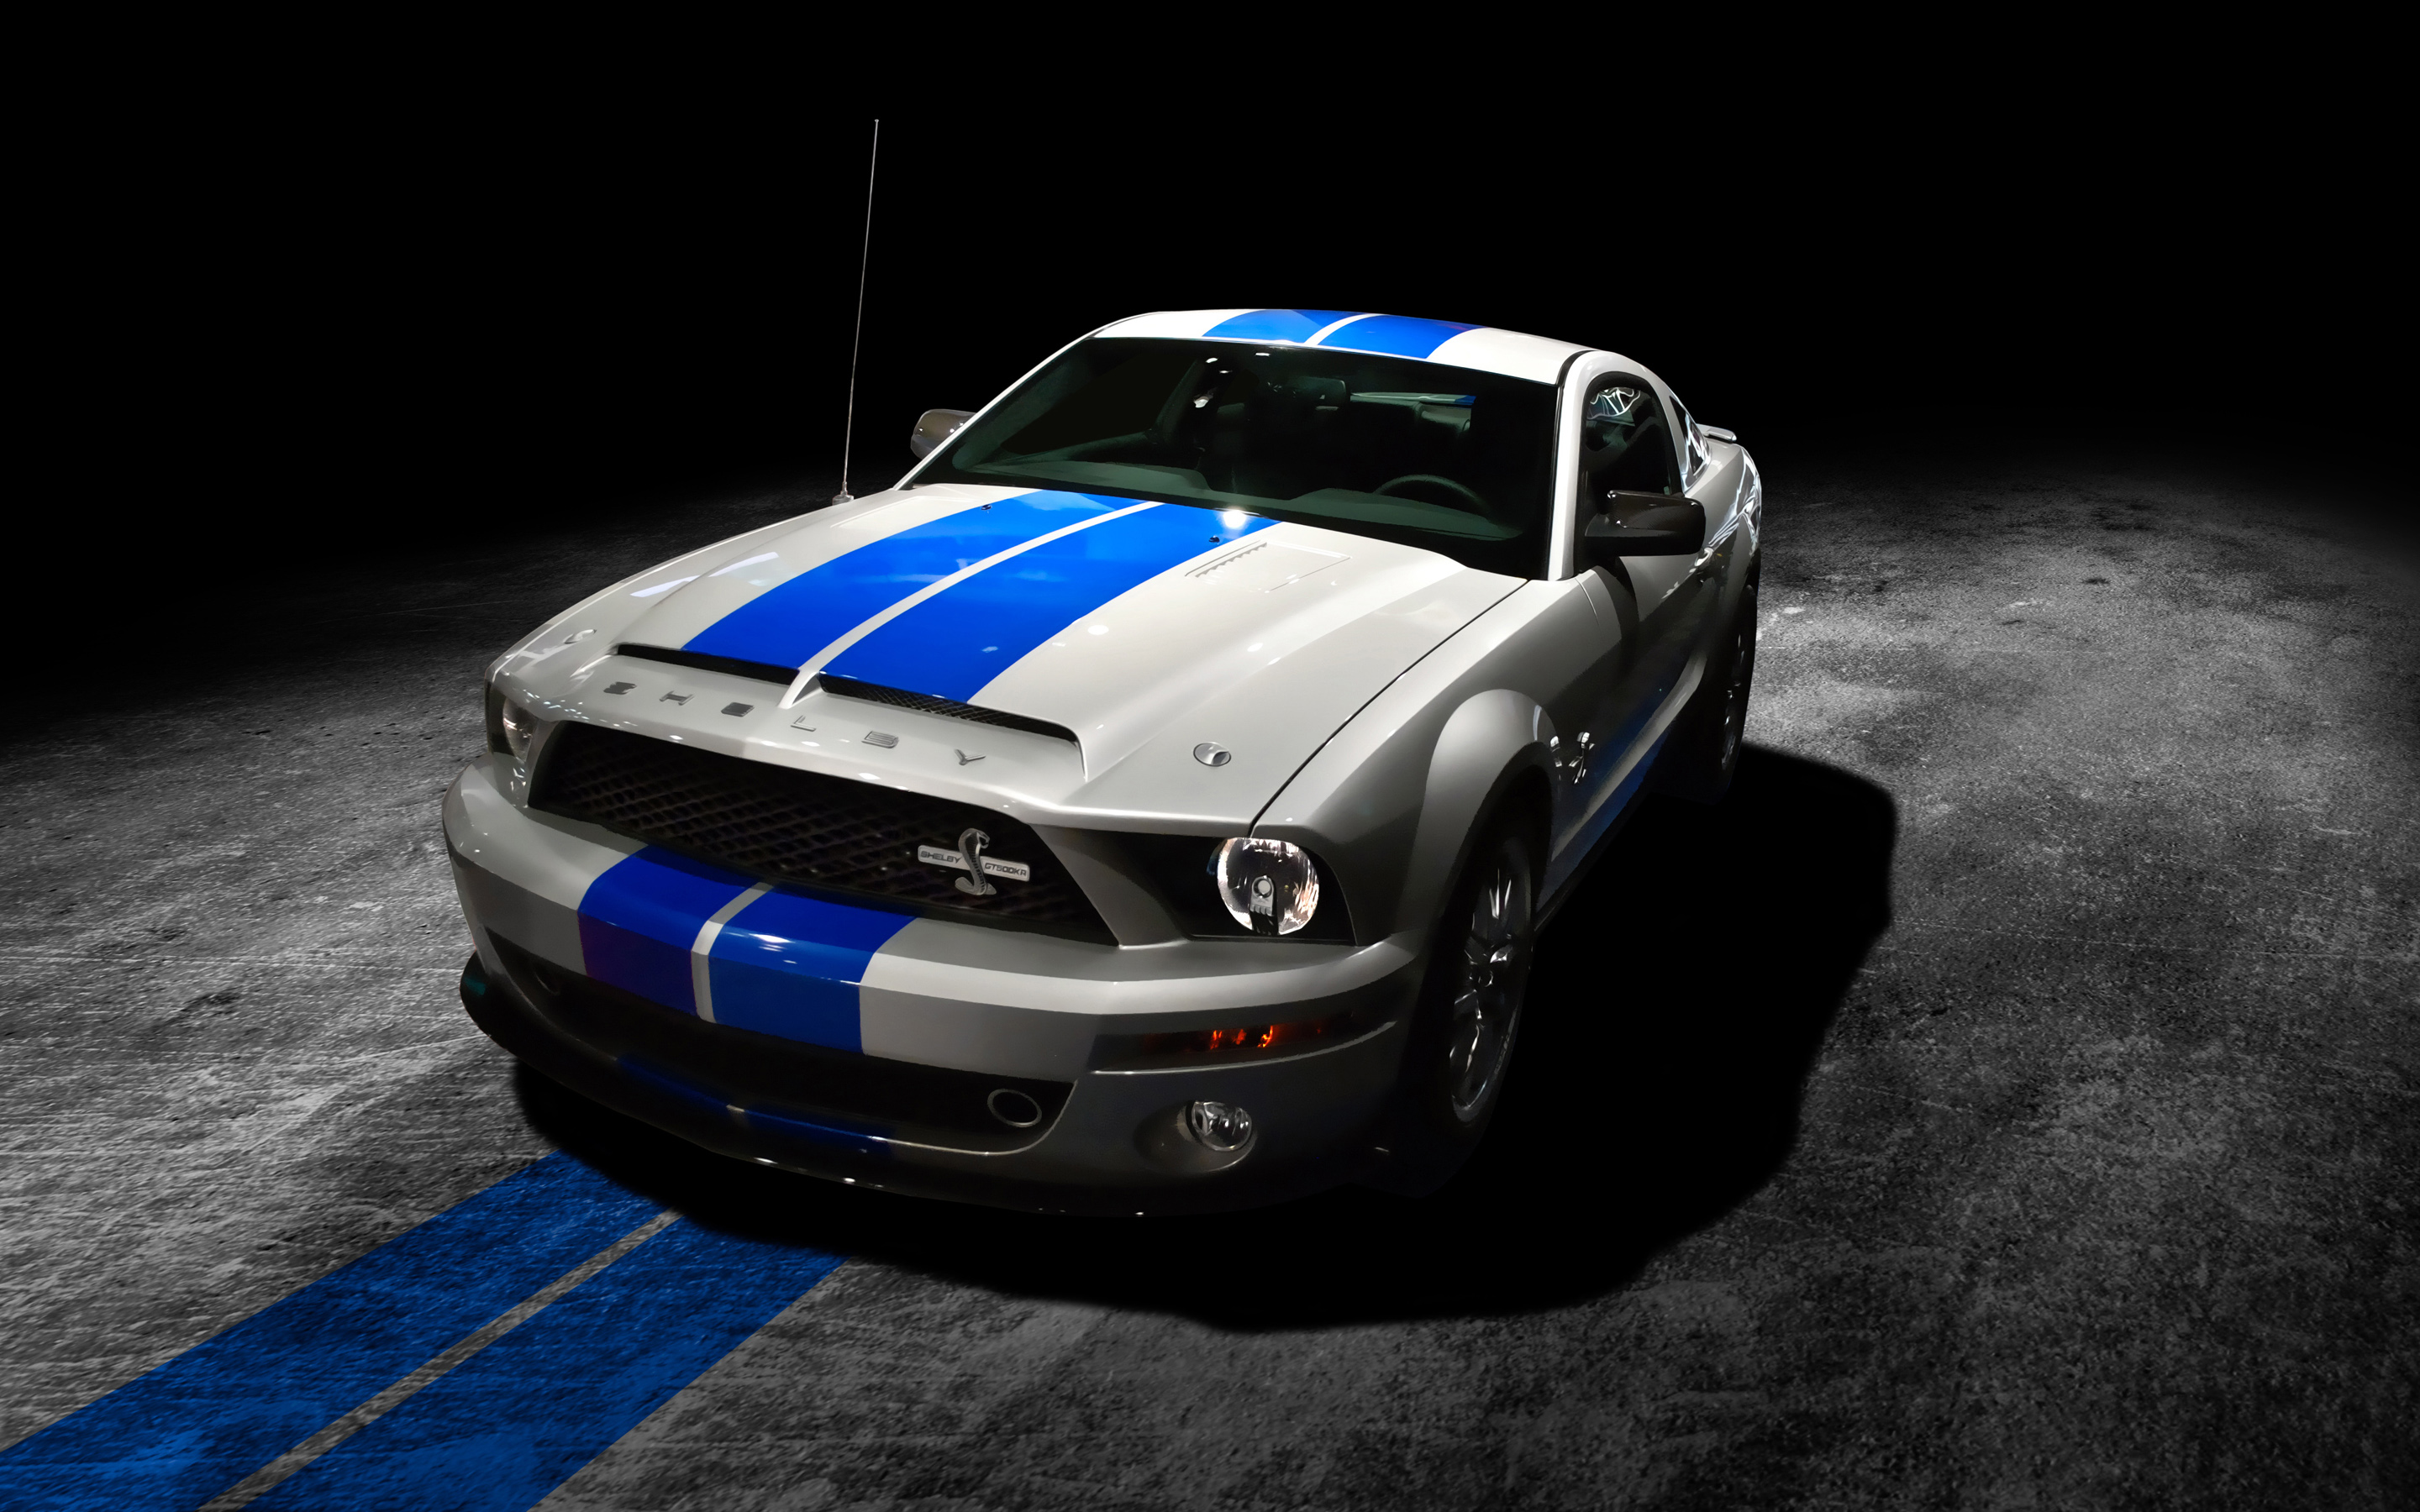 Mustang Wallpaper Free HD Attachment 15595 - HD Wallpapers Site